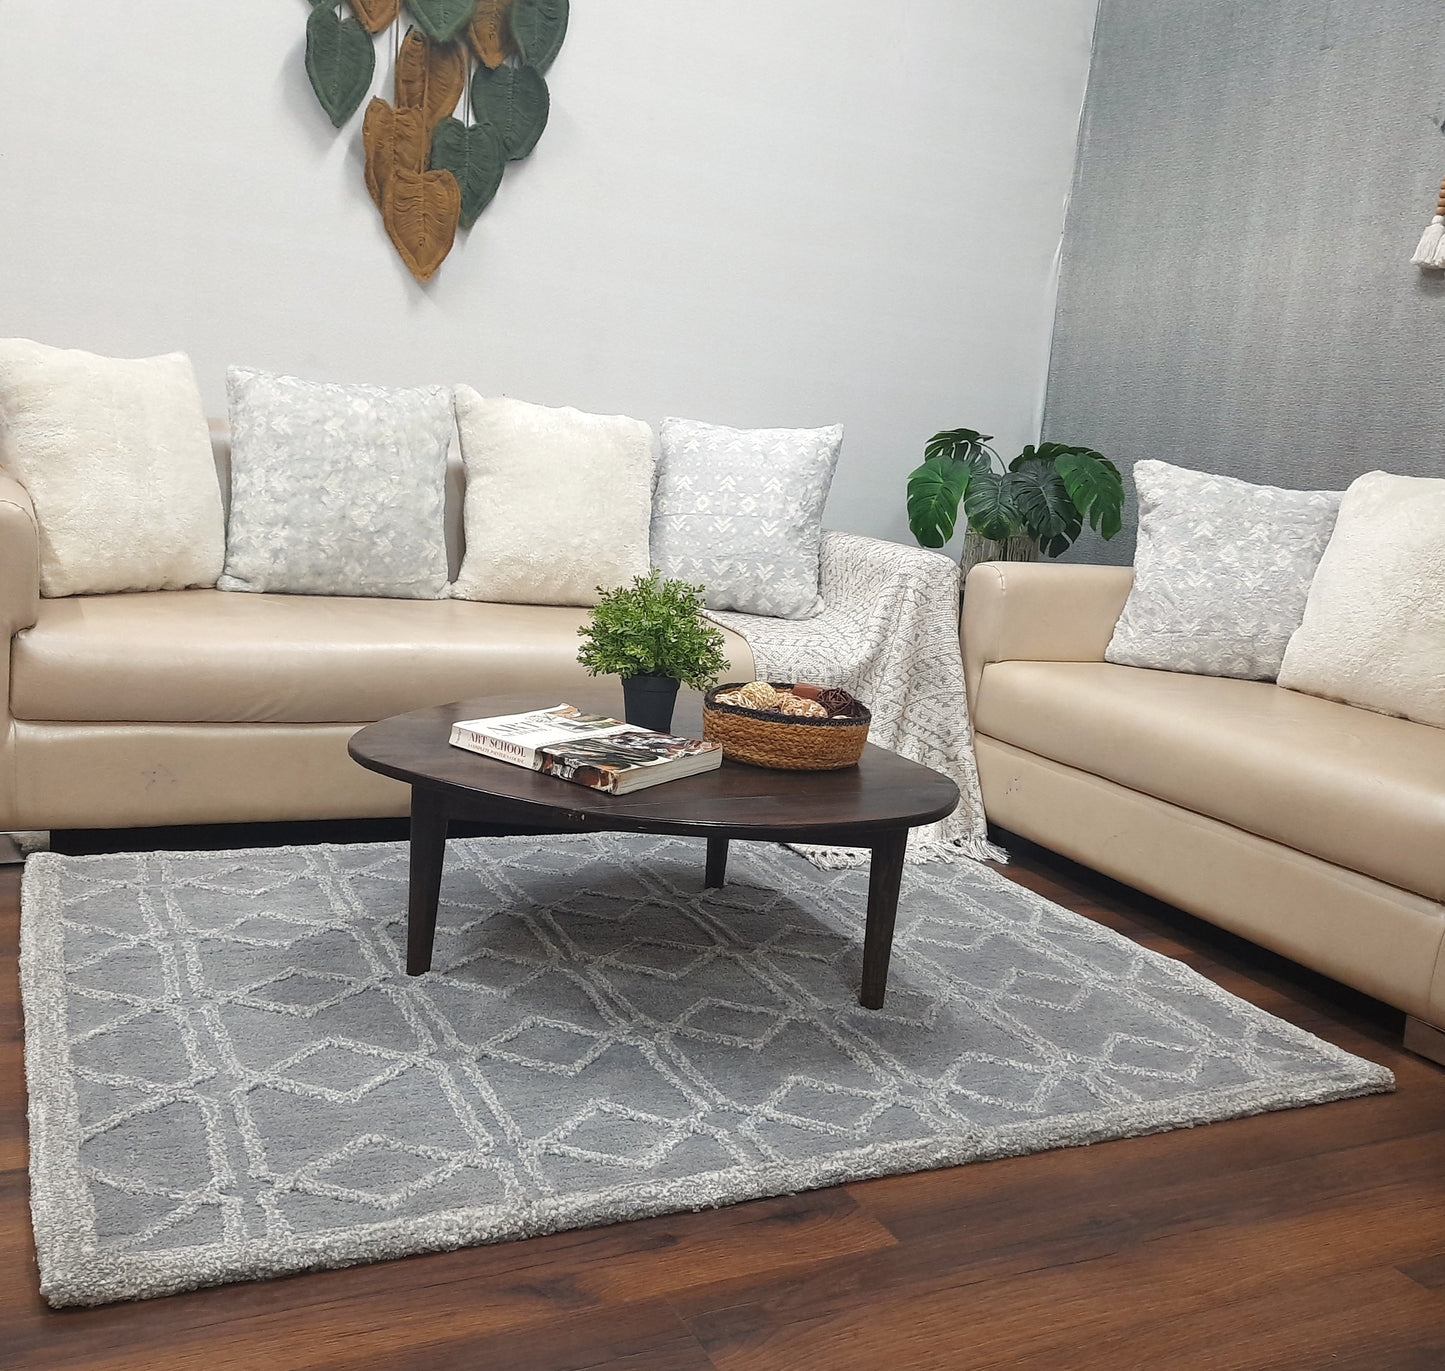 Avioni Modern Collection- Plush Grey Carpet with 3d Ethnic Design -Different Sizes Shaggy Fluffy Rugs and Carpet for Living Room